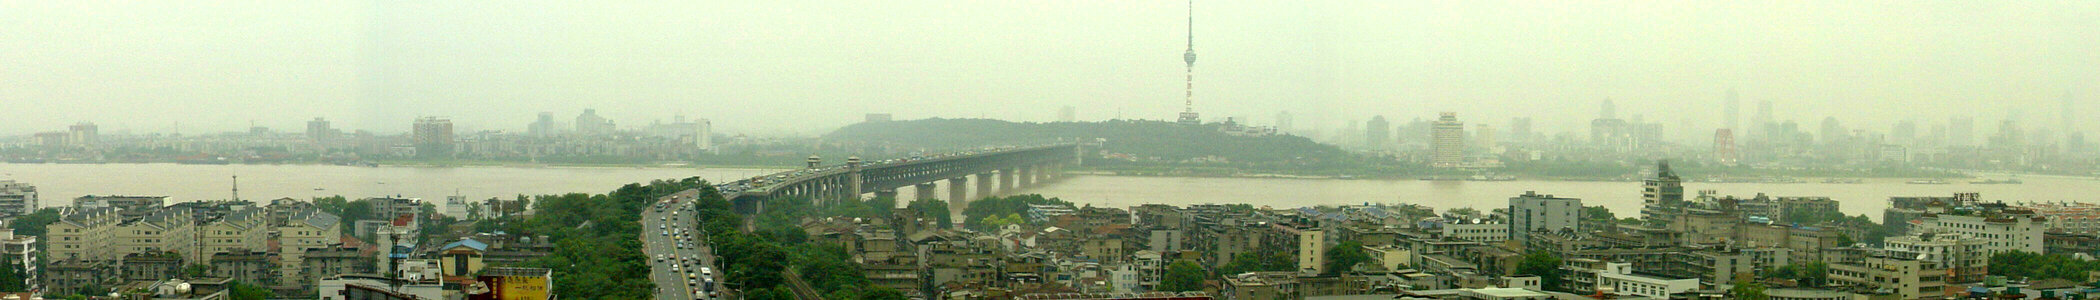 Wuhan Banner Bridge over the river Panoramic photo